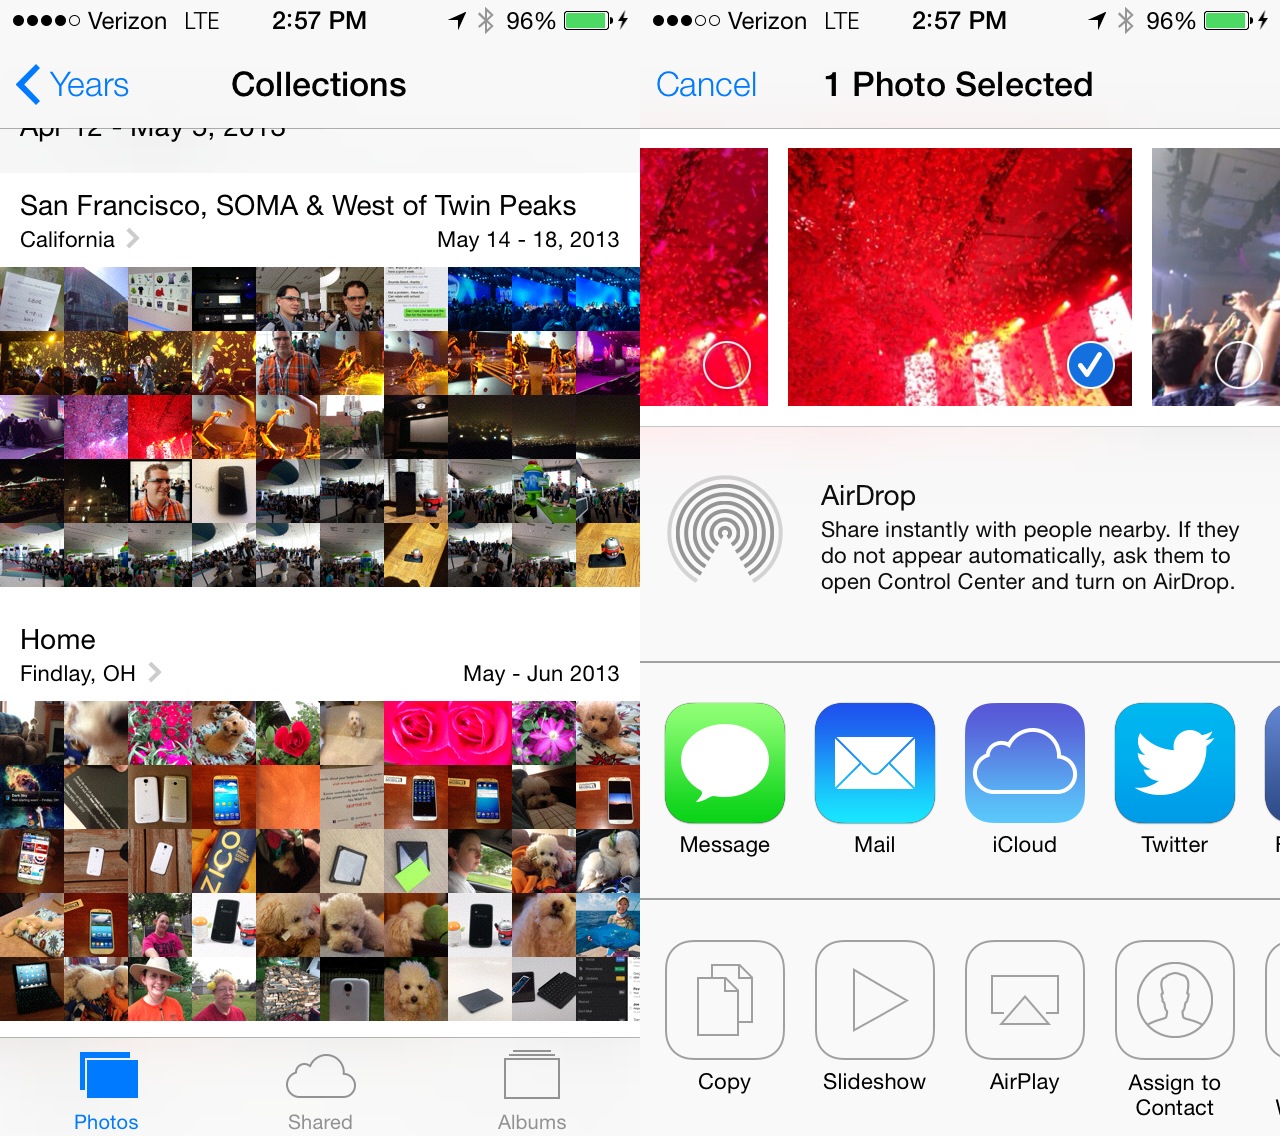 iOS 7 includes a new Photos App with easier sharing.